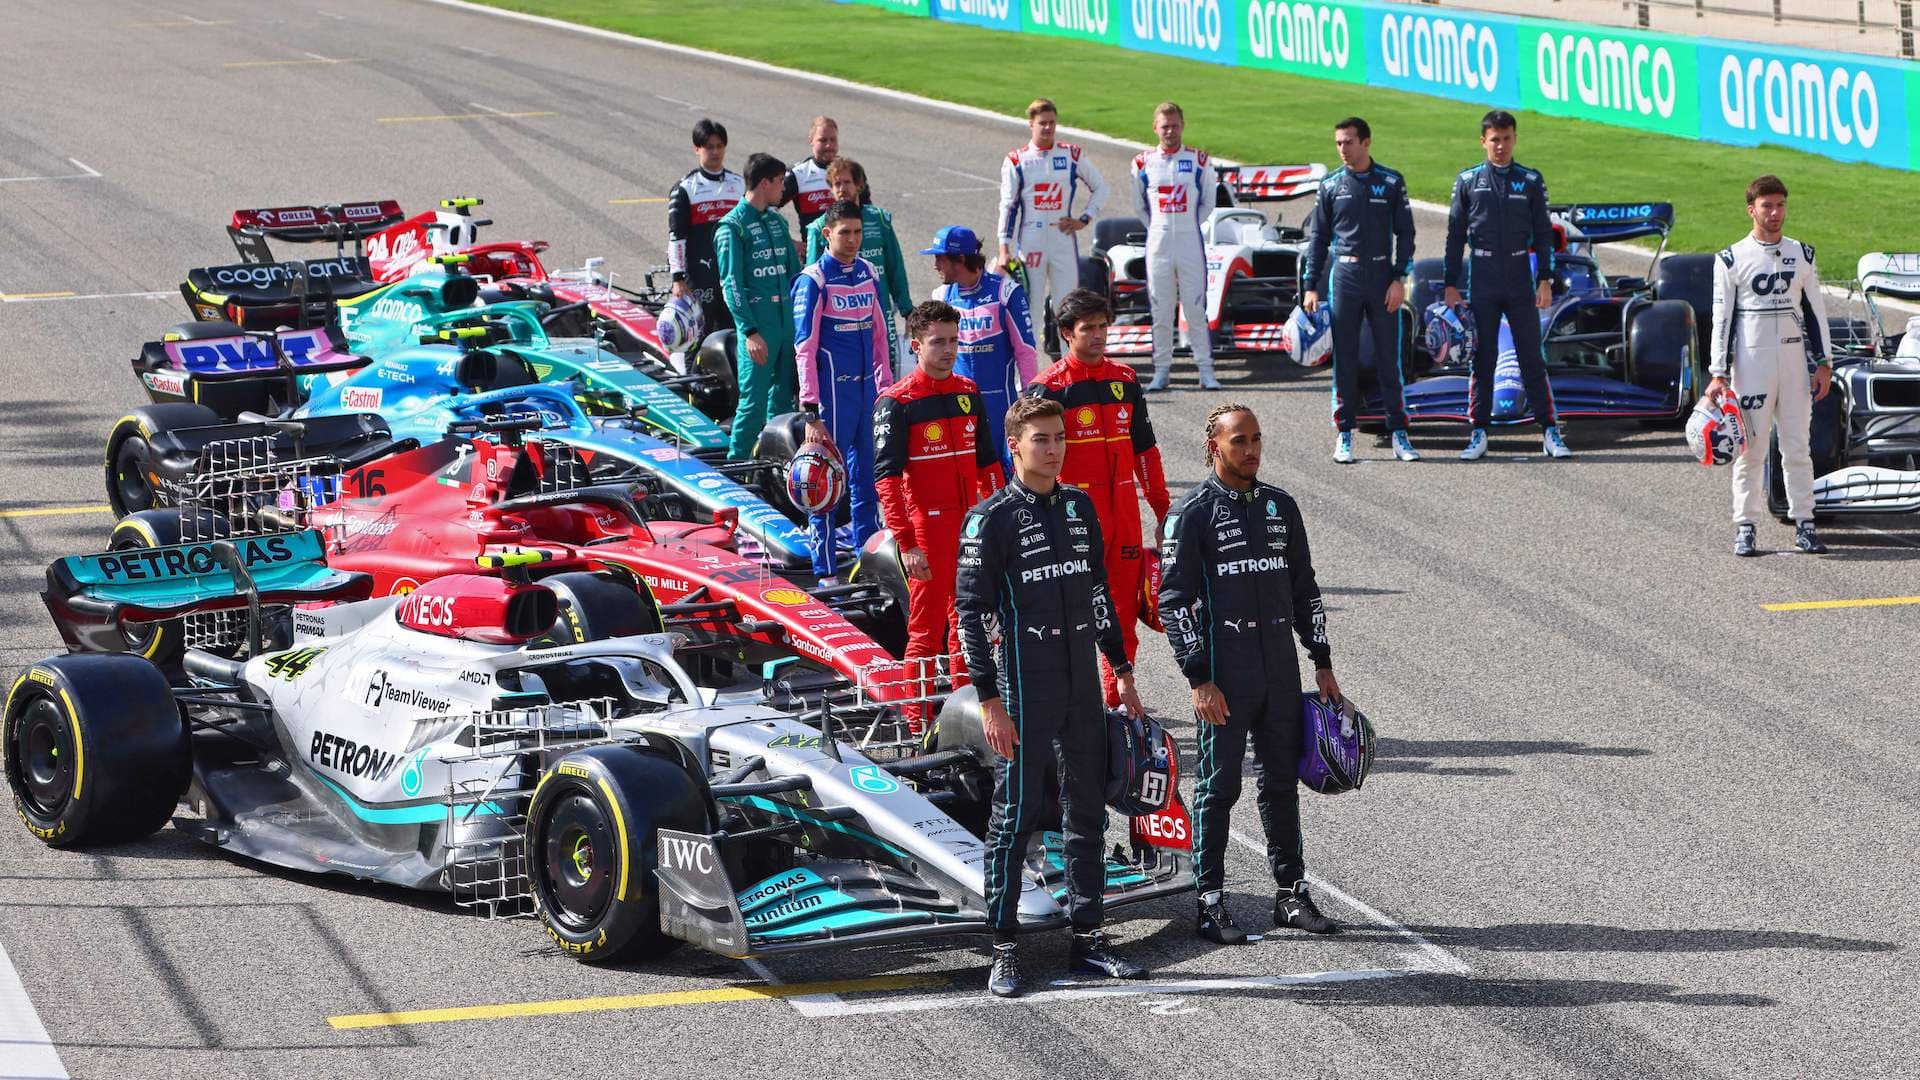 Here’s Your Comprehensive 2022 Formula 1 Team and Driver Guide